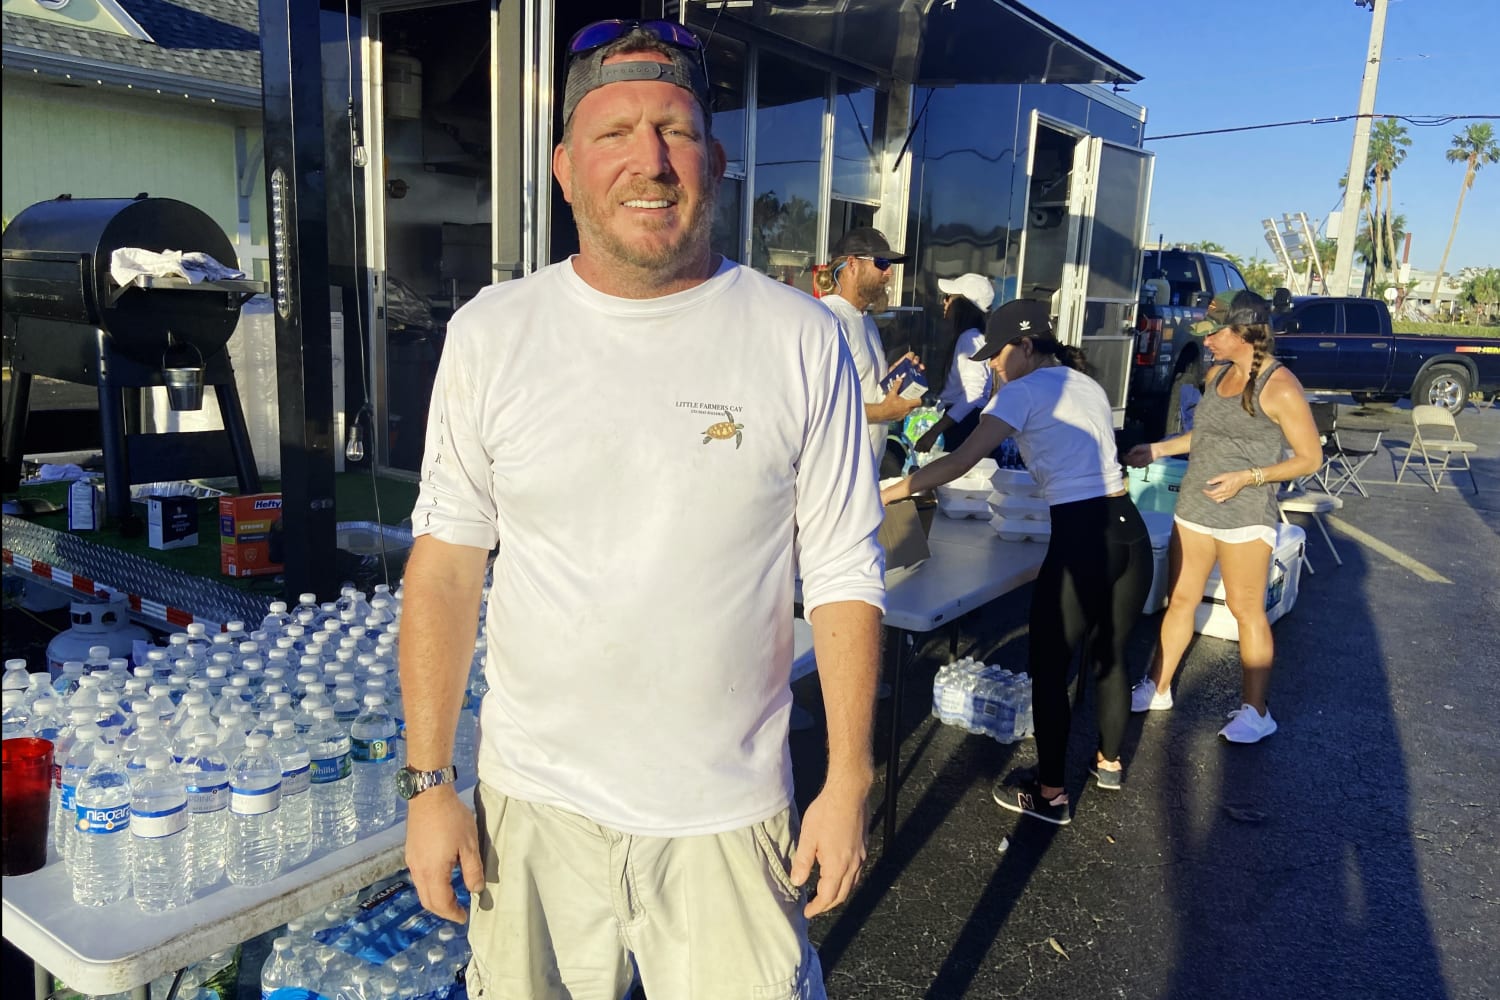 Left in ‘dire straits’ by Hurricane Ian, Floridians find comfort in a local chef’s free meals